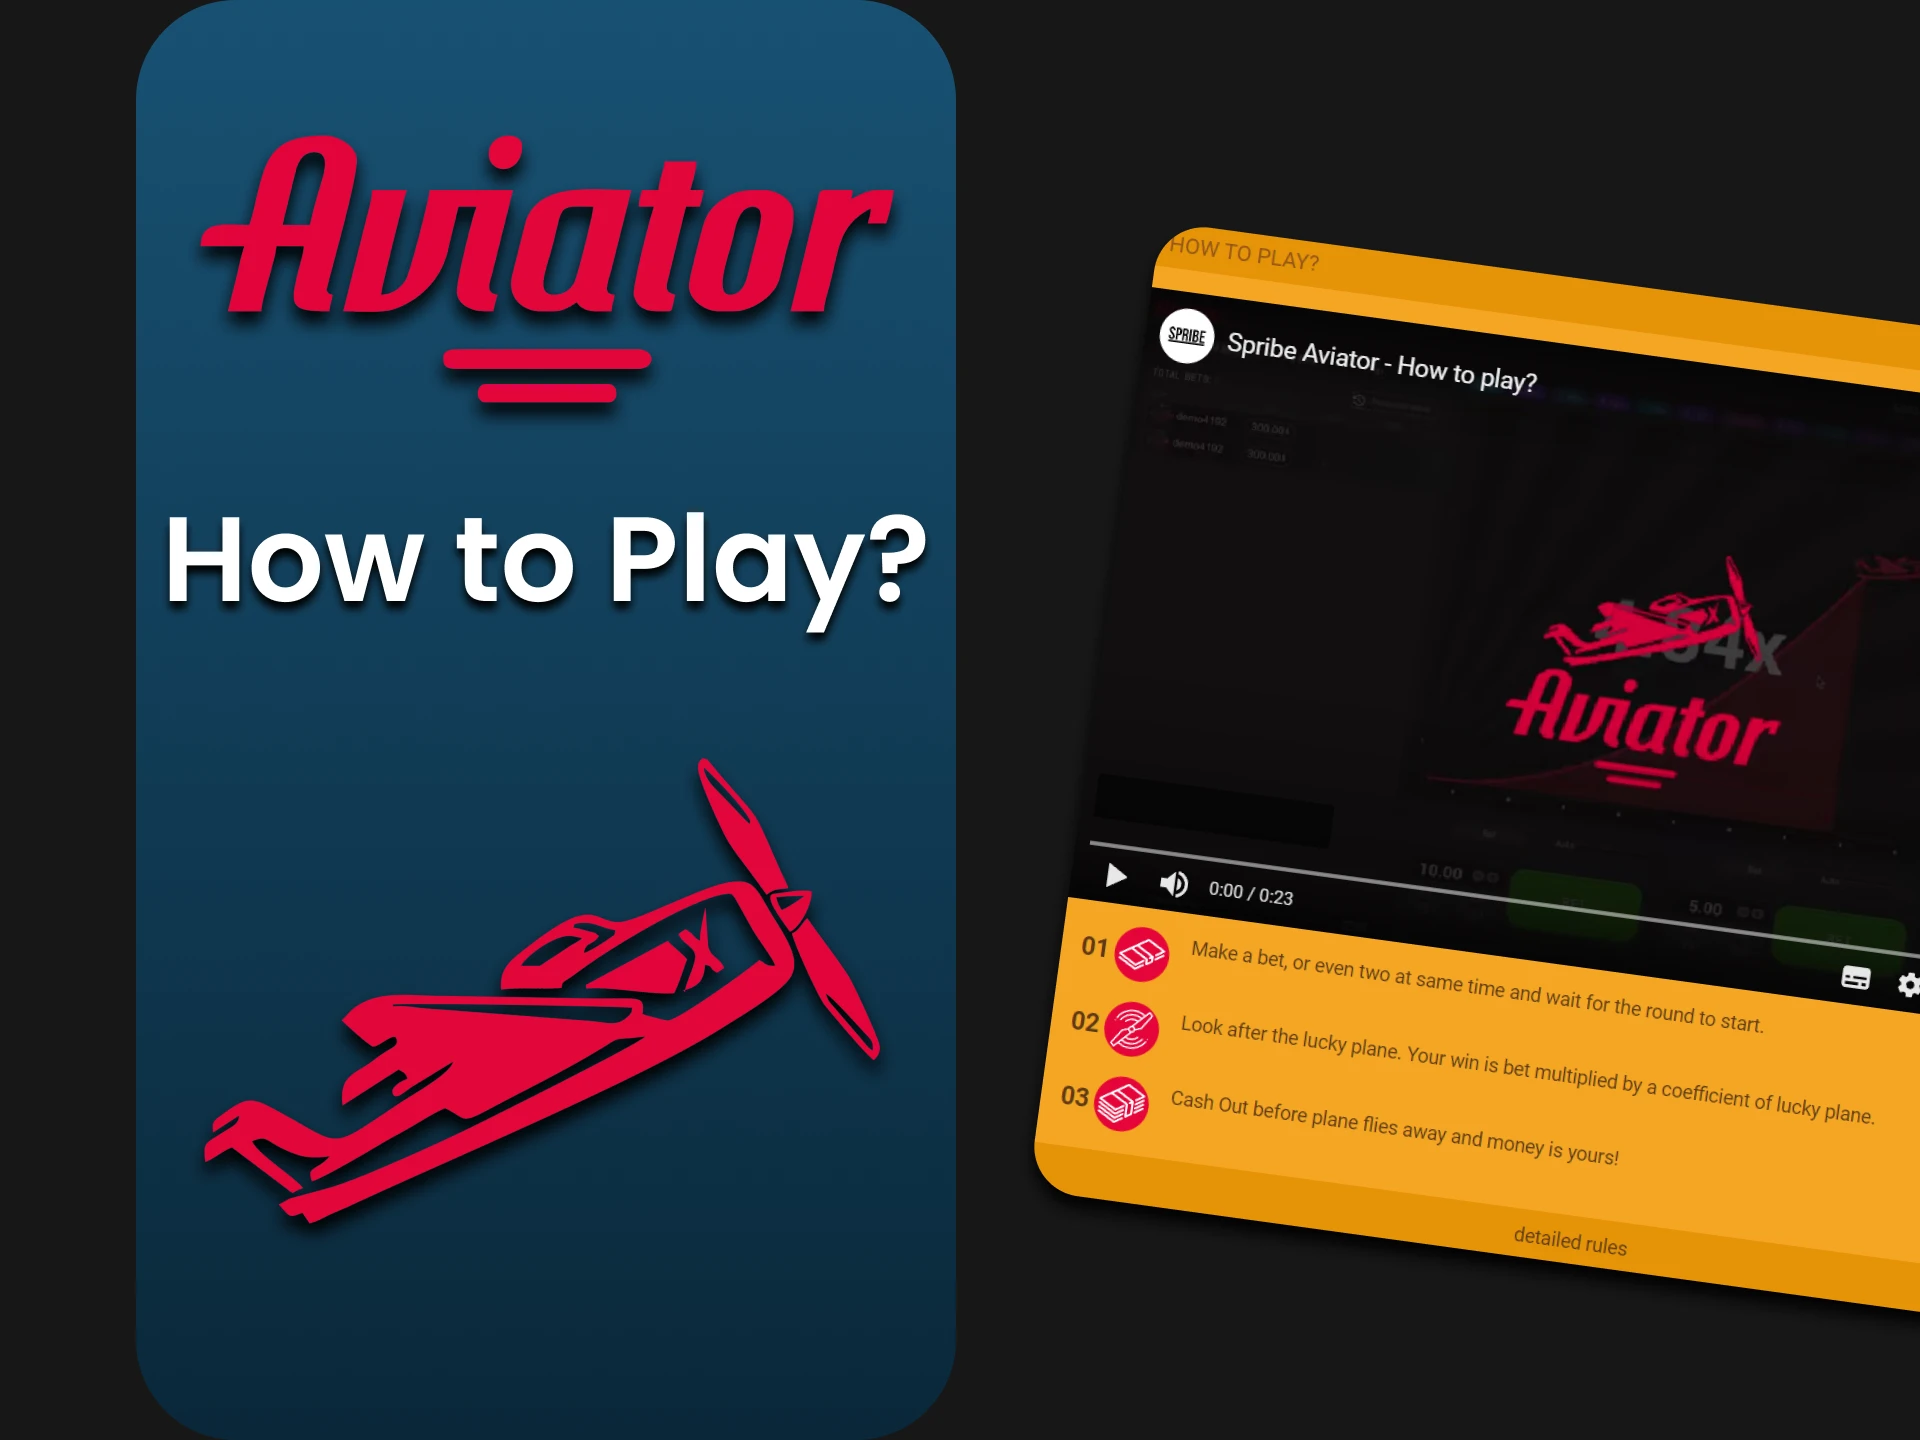 We will tell you how to play Aviator.